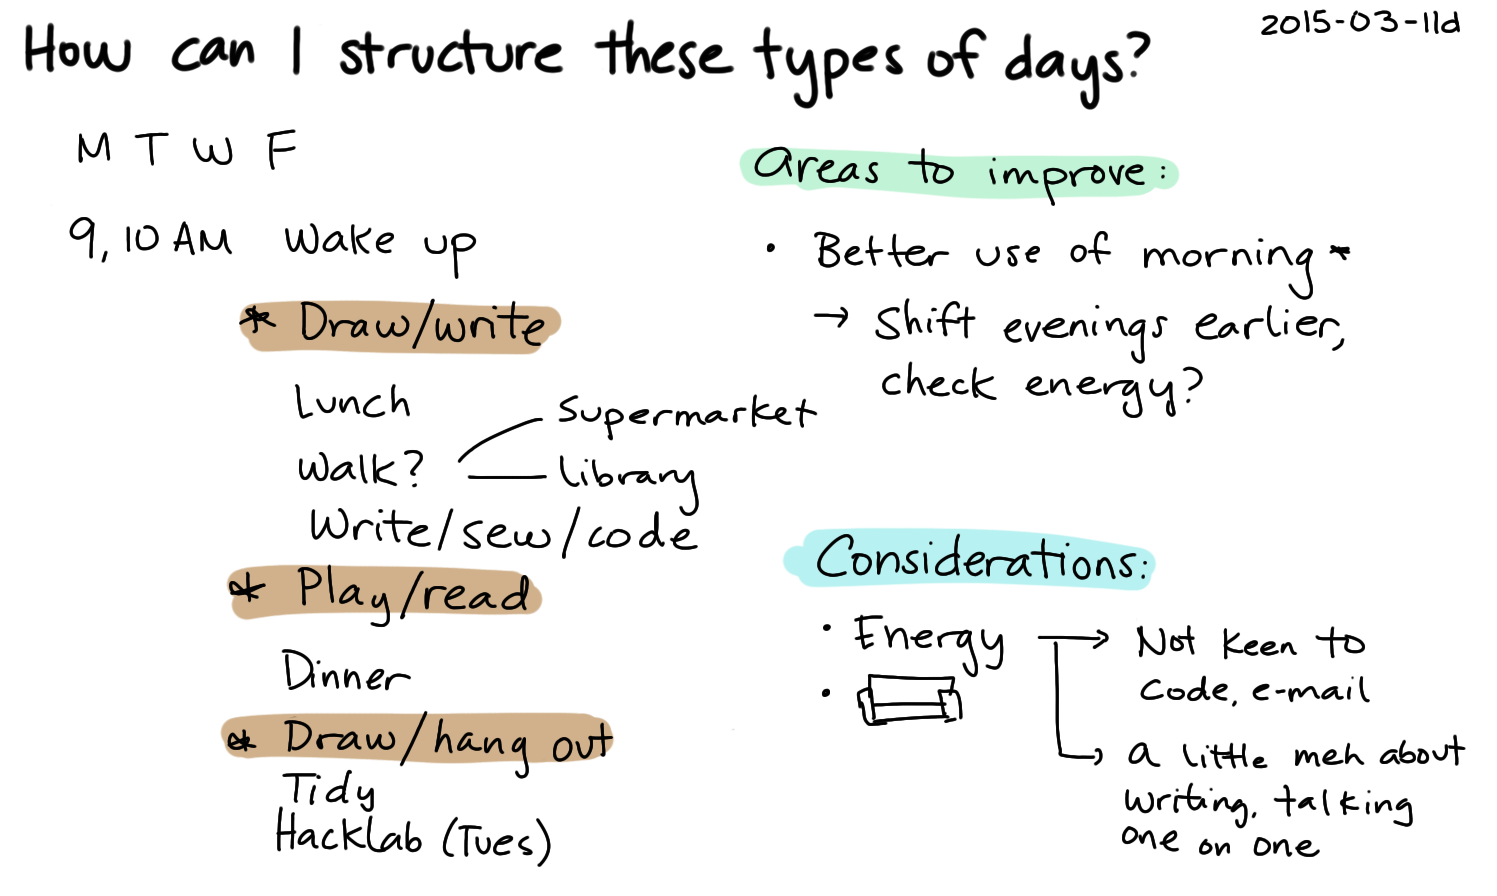 2015-03-11d How can I structure these types of days -- index card #limbo #routines.png